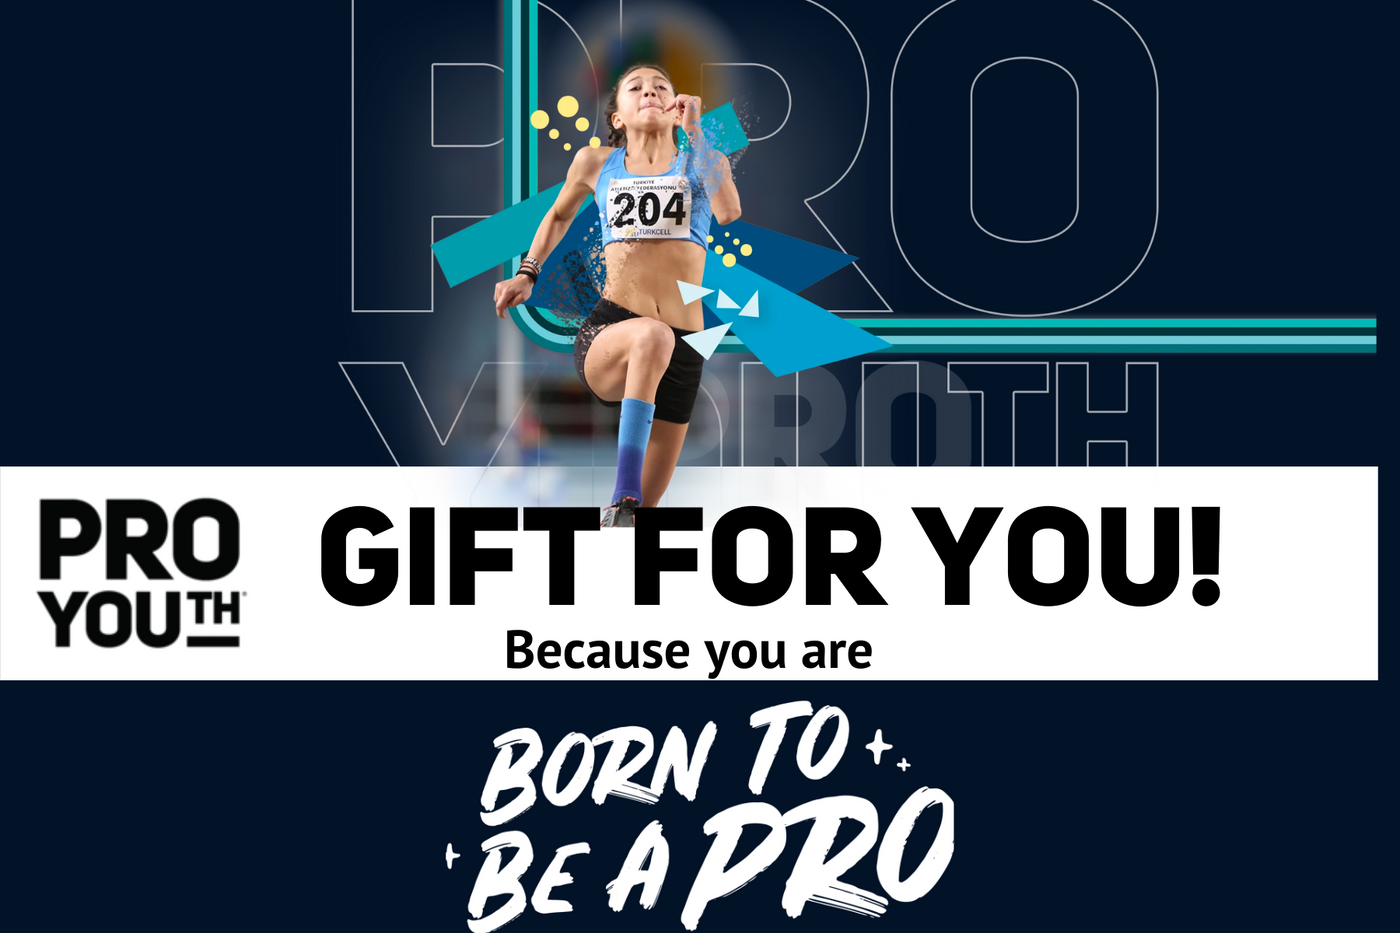 ProYouth gift voucher